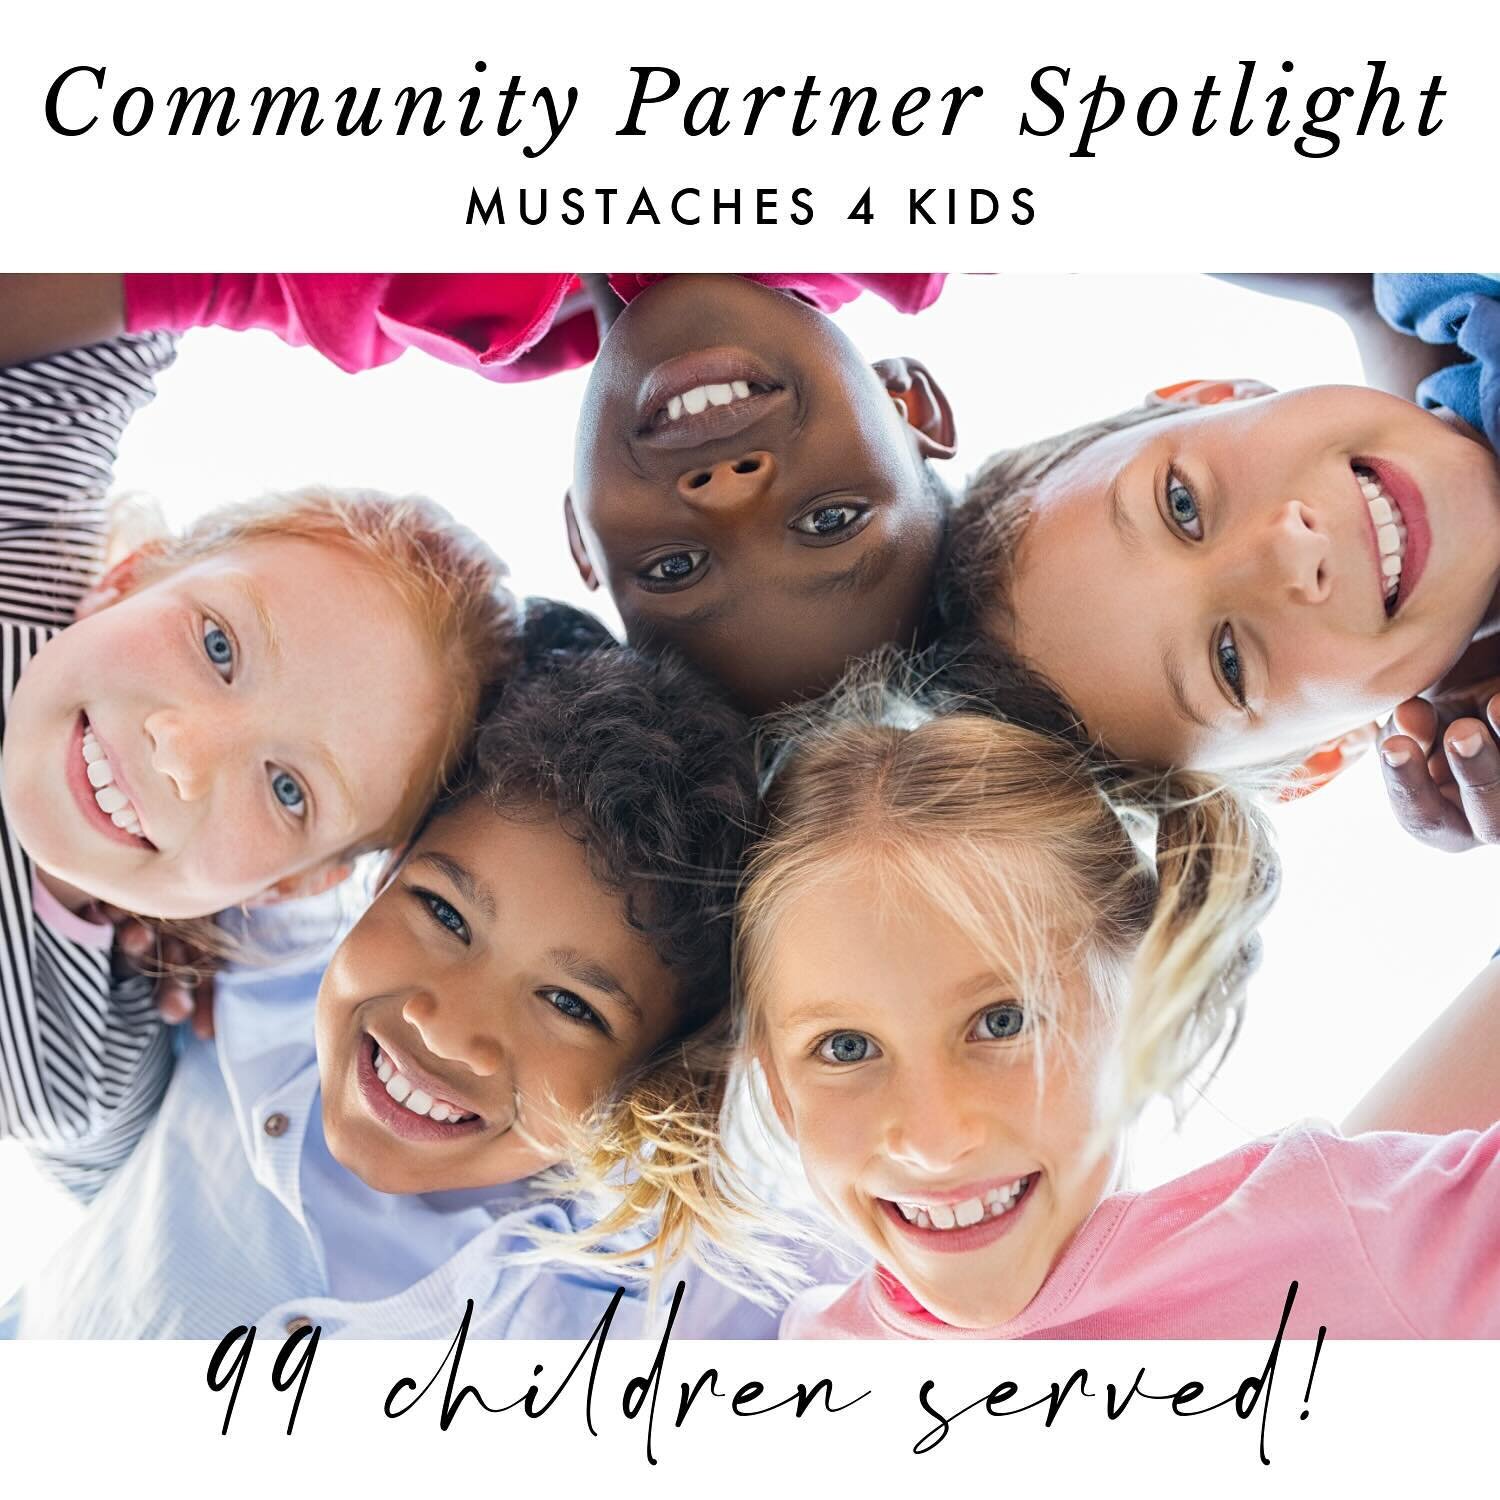 🌟We&rsquo;re thrilled to shine the spotlight on our amazing partners, Mustaches 4 Kids! Their dedication and fundraising efforts are instrumental in our mission and goal of ending family homelessness in our community.

🏡Since January 1st, we&rsquo;